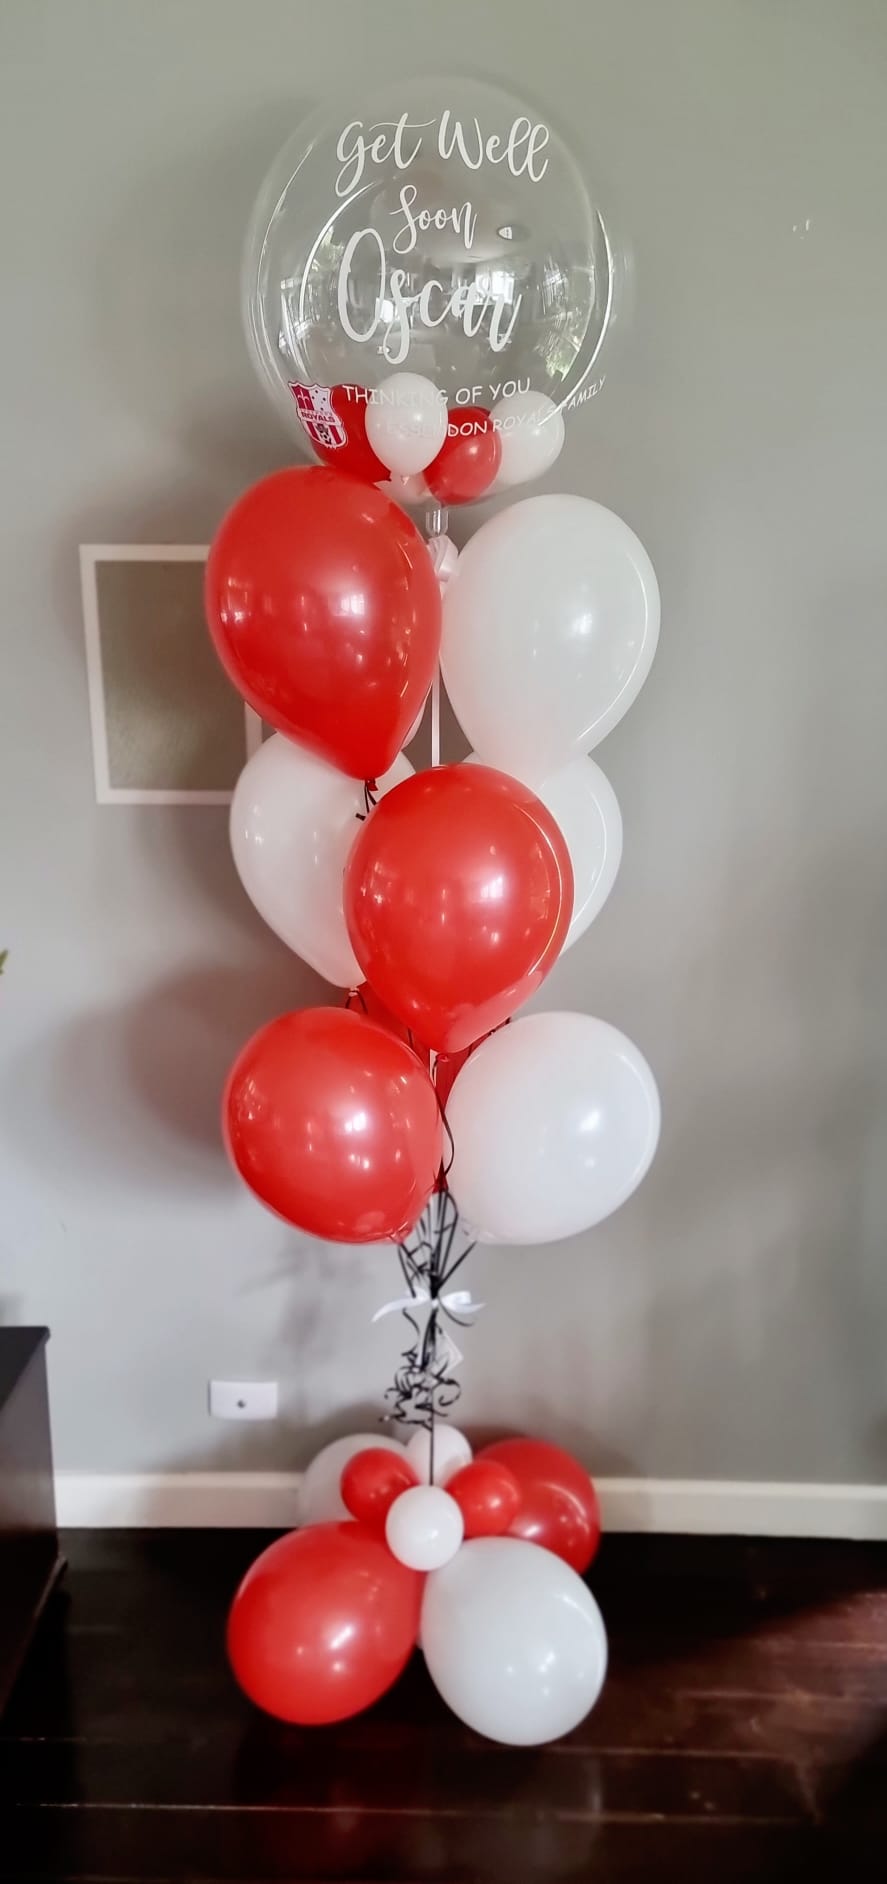 Red and White Personalised Balloon Bouquet Delivered in Melbourne 7 days Brand Logo Printed